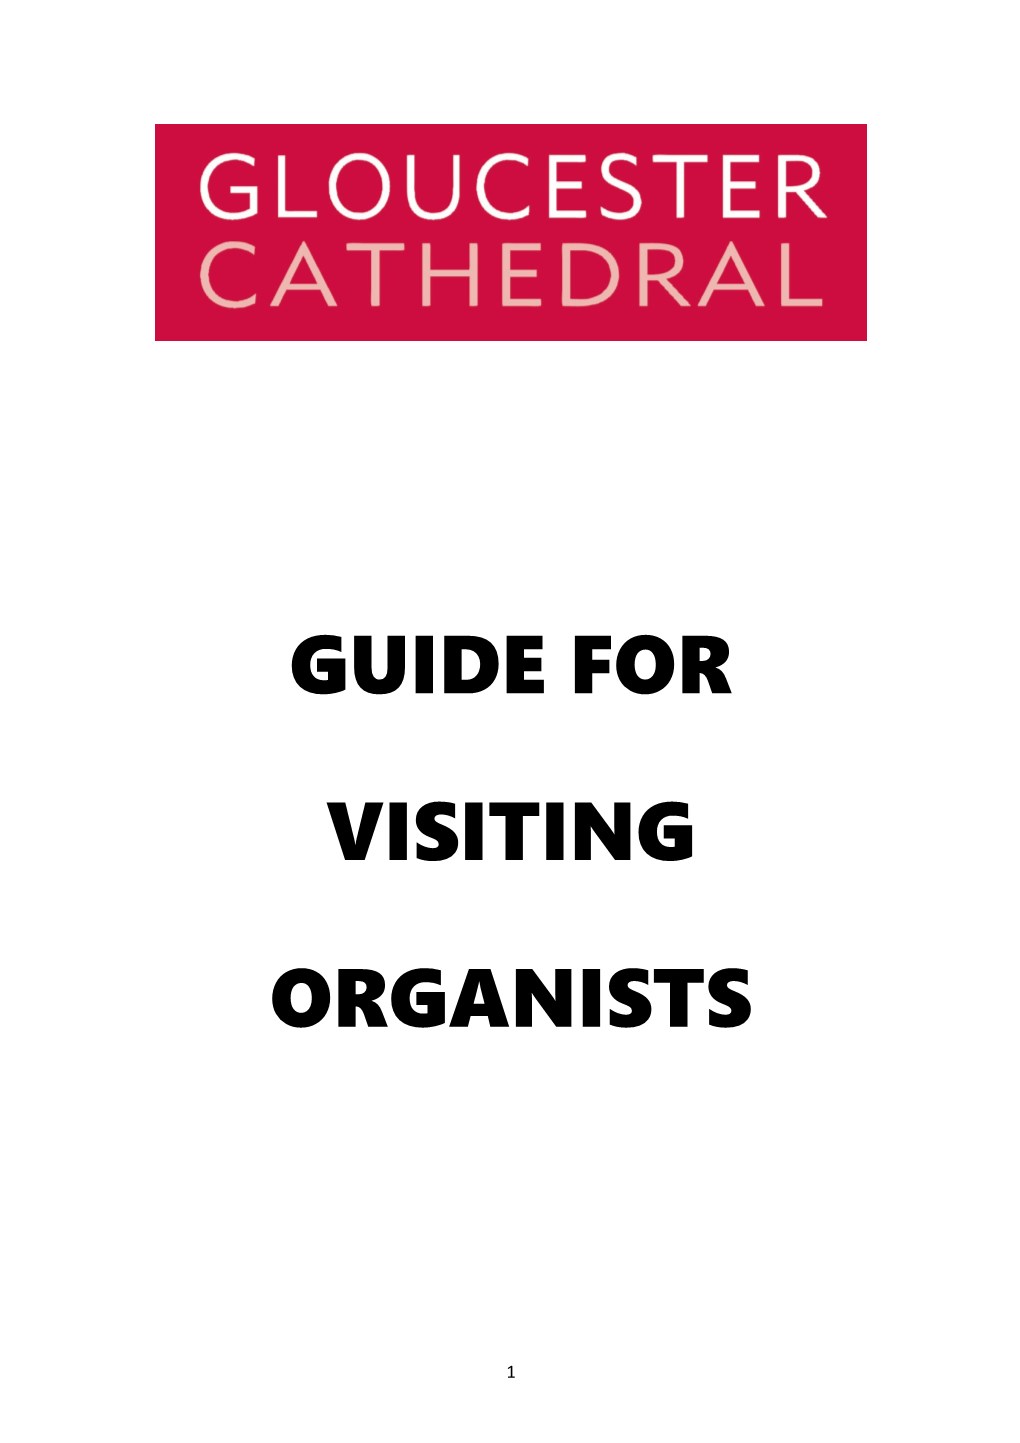 Guide for Visiting Organists